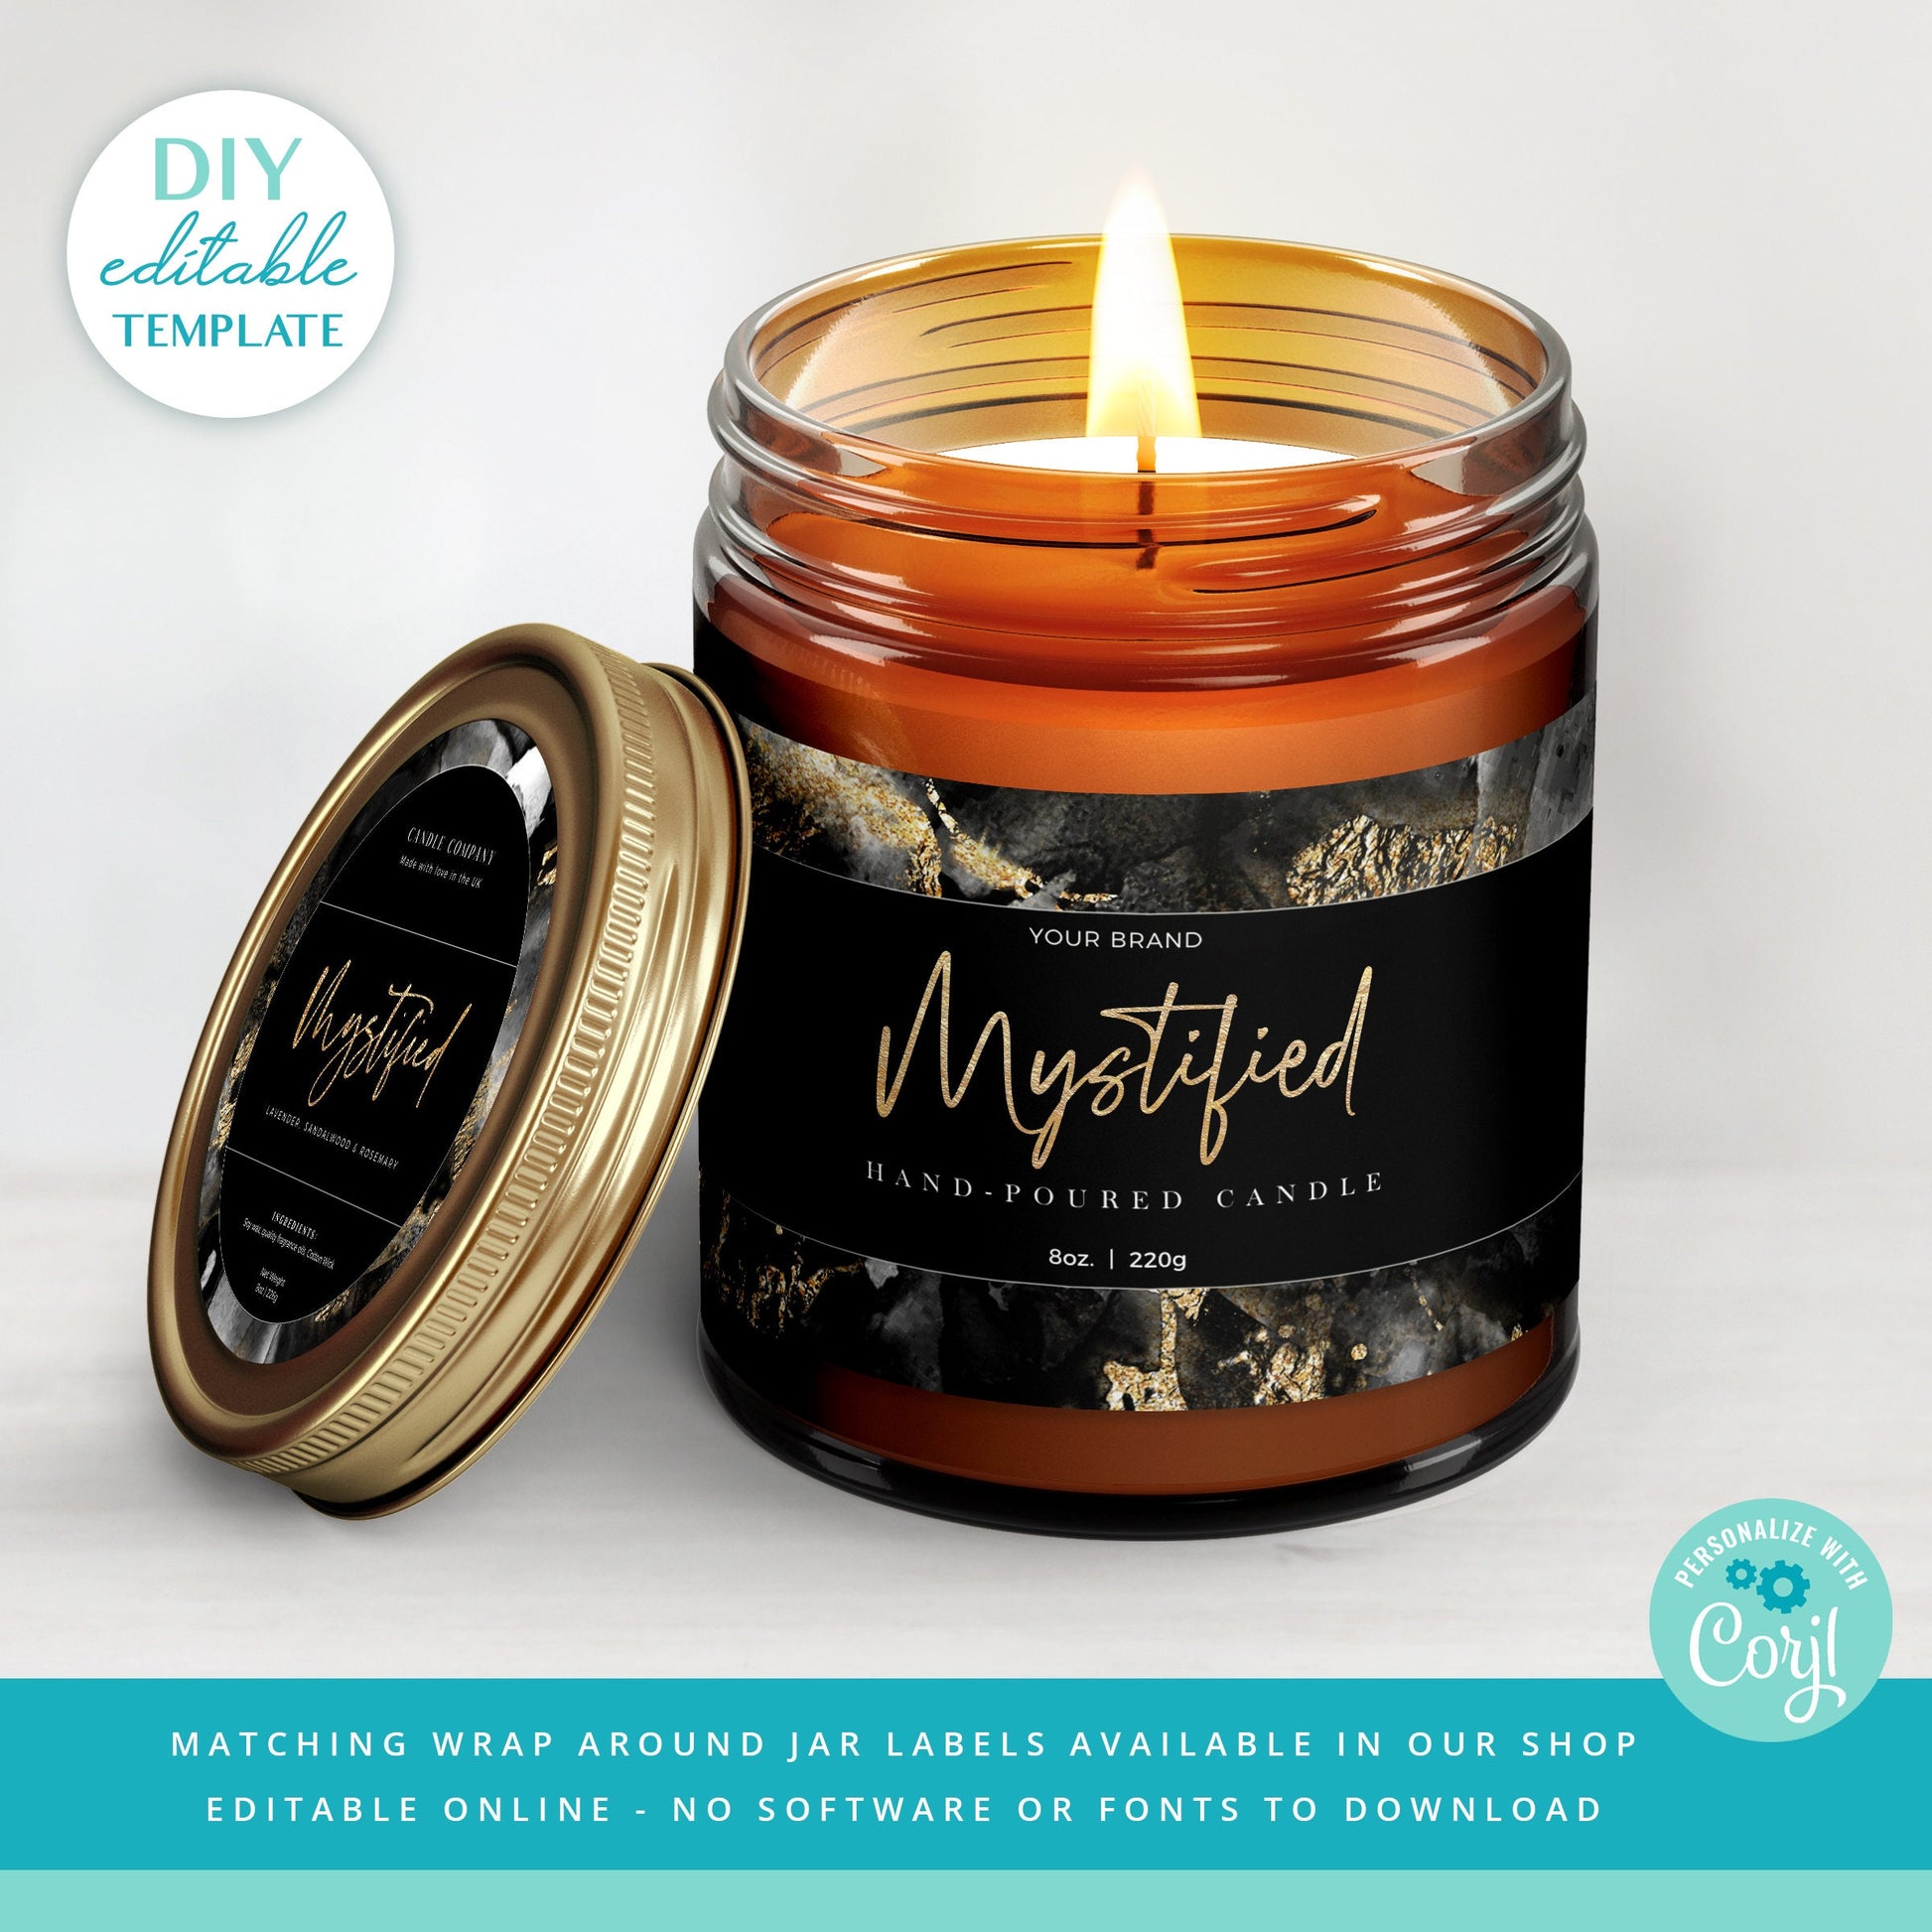 Editable Product Label Black Marble Personalised Wrap Around Candle Template, 4 Sizes: 2x6", 2x7, 2.5x8", 2.5x9" DIY Instant Access MY-001